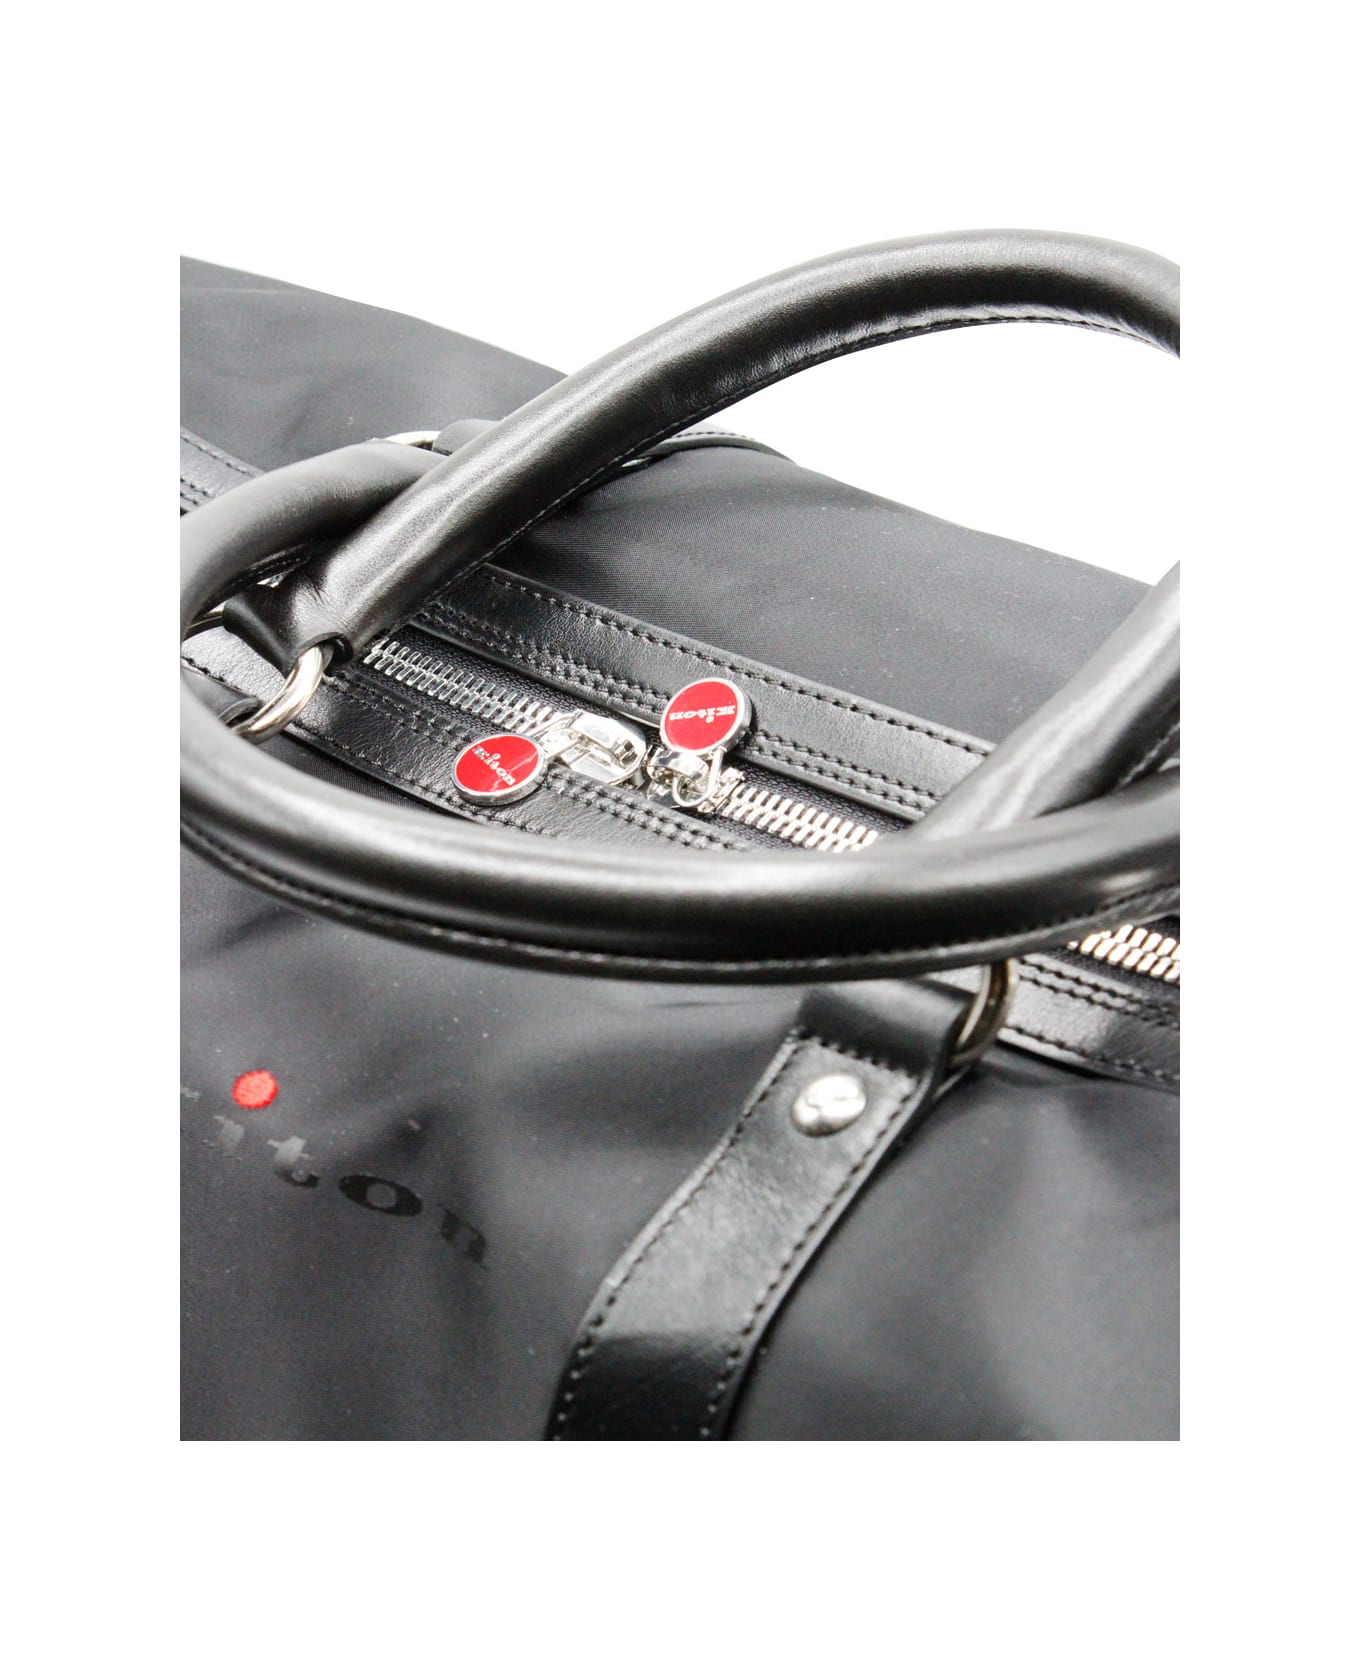 Kiton Travel Bag In Technical Fabric With Leather Inserts And Logo, Shoulder Strap Supplied 52 X 30 X 125 Cm - Black